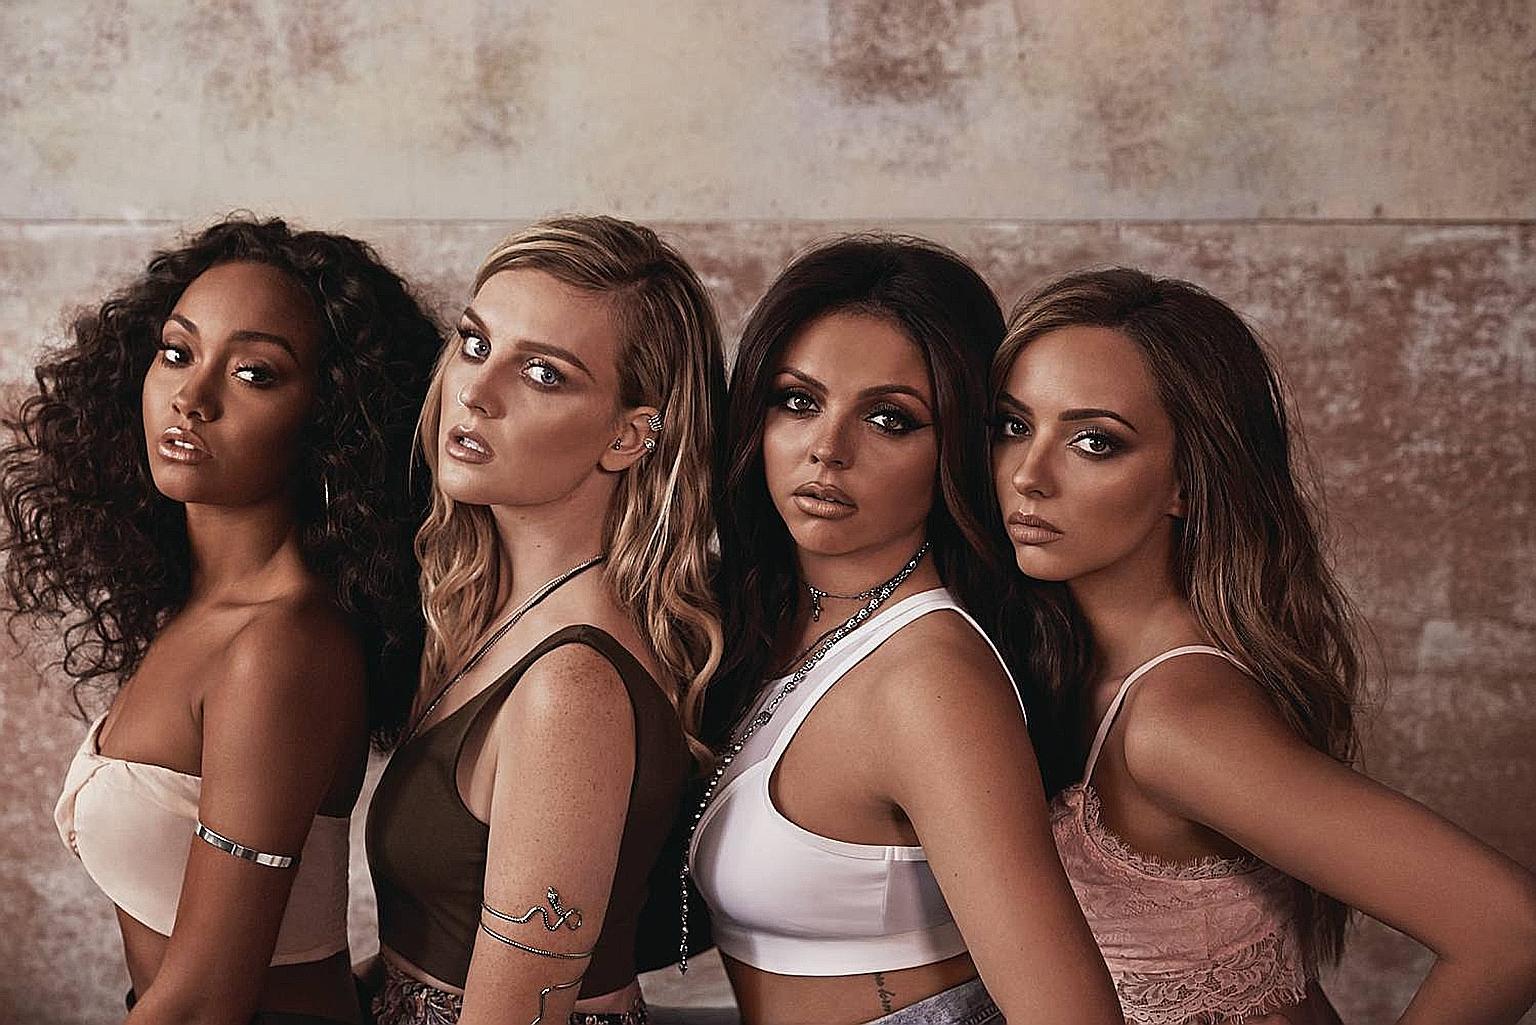 One Direction's labelmates Little Mix have no thoughts of solo